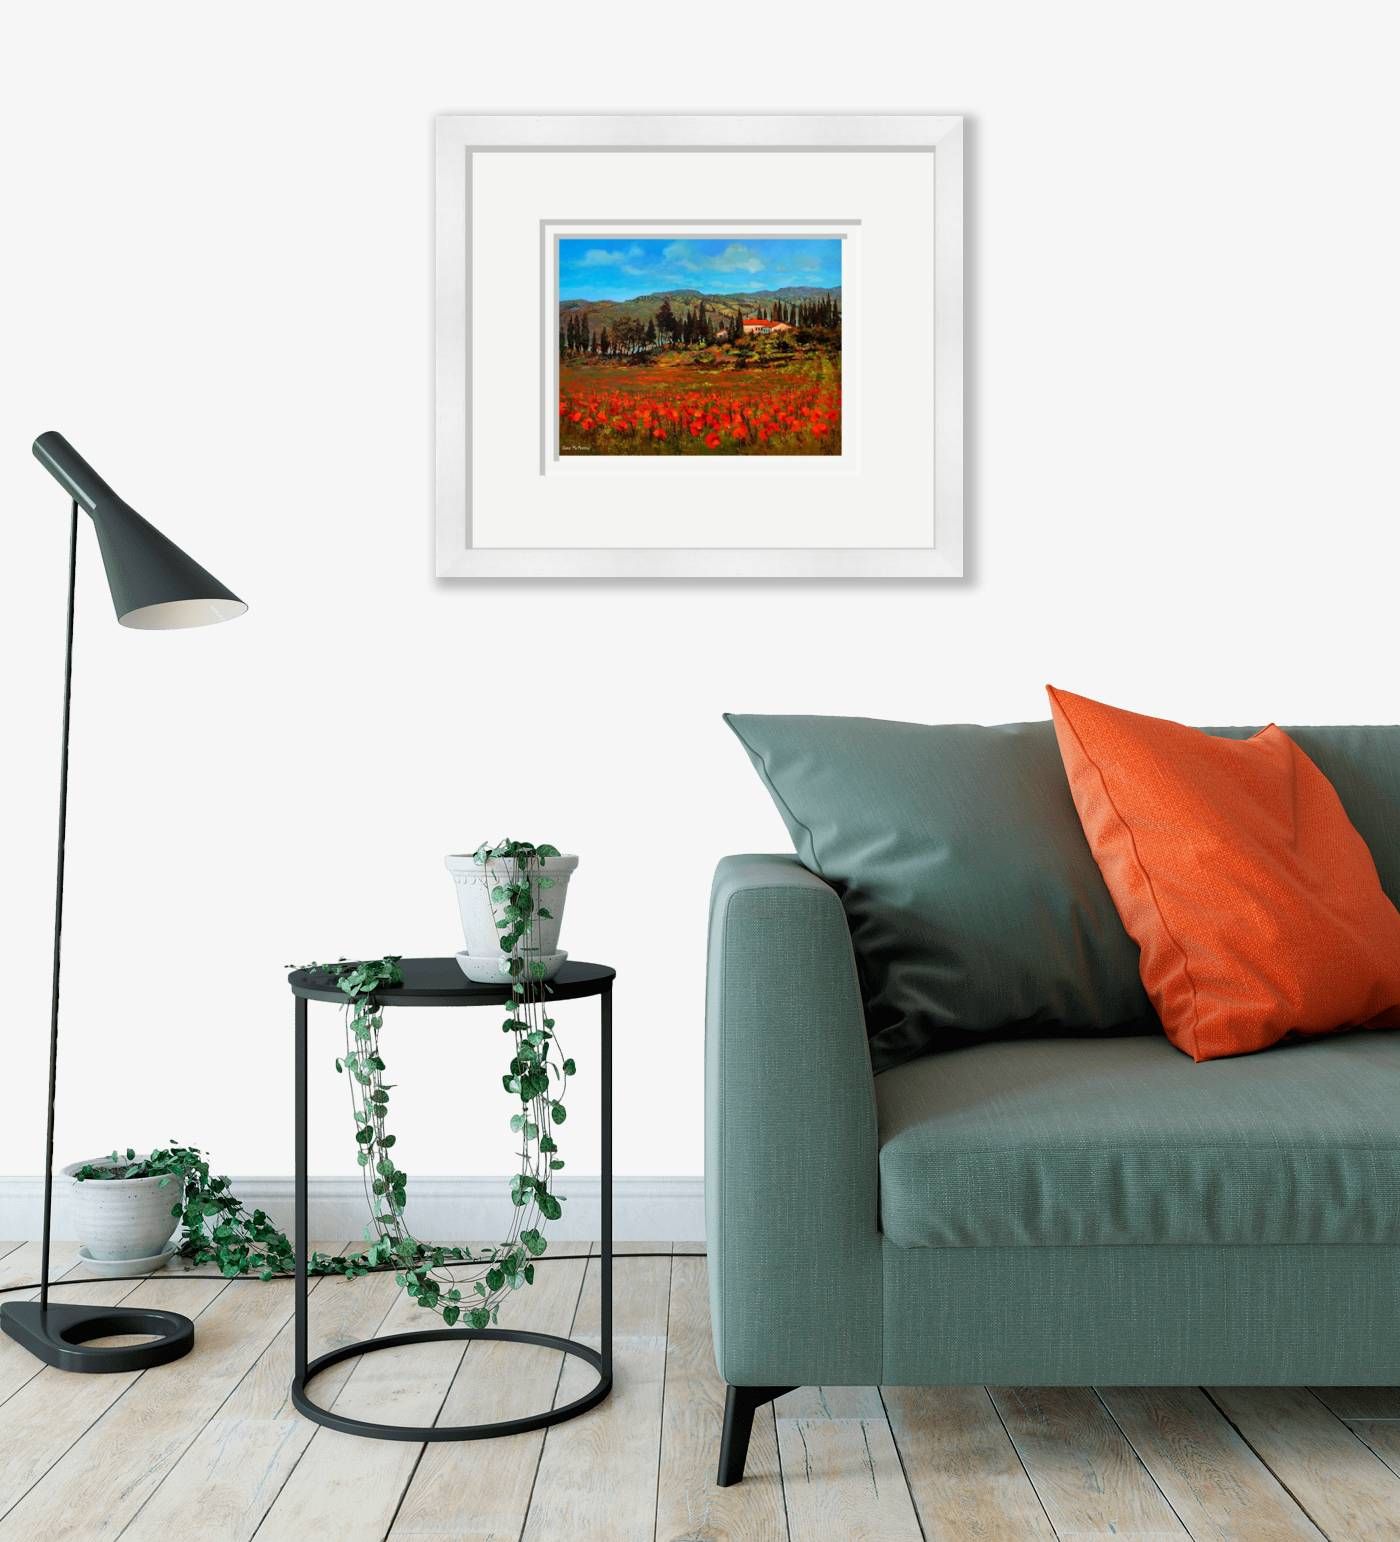 Large framed - Poppies, Tuscany - 51 by Chris McMorrow